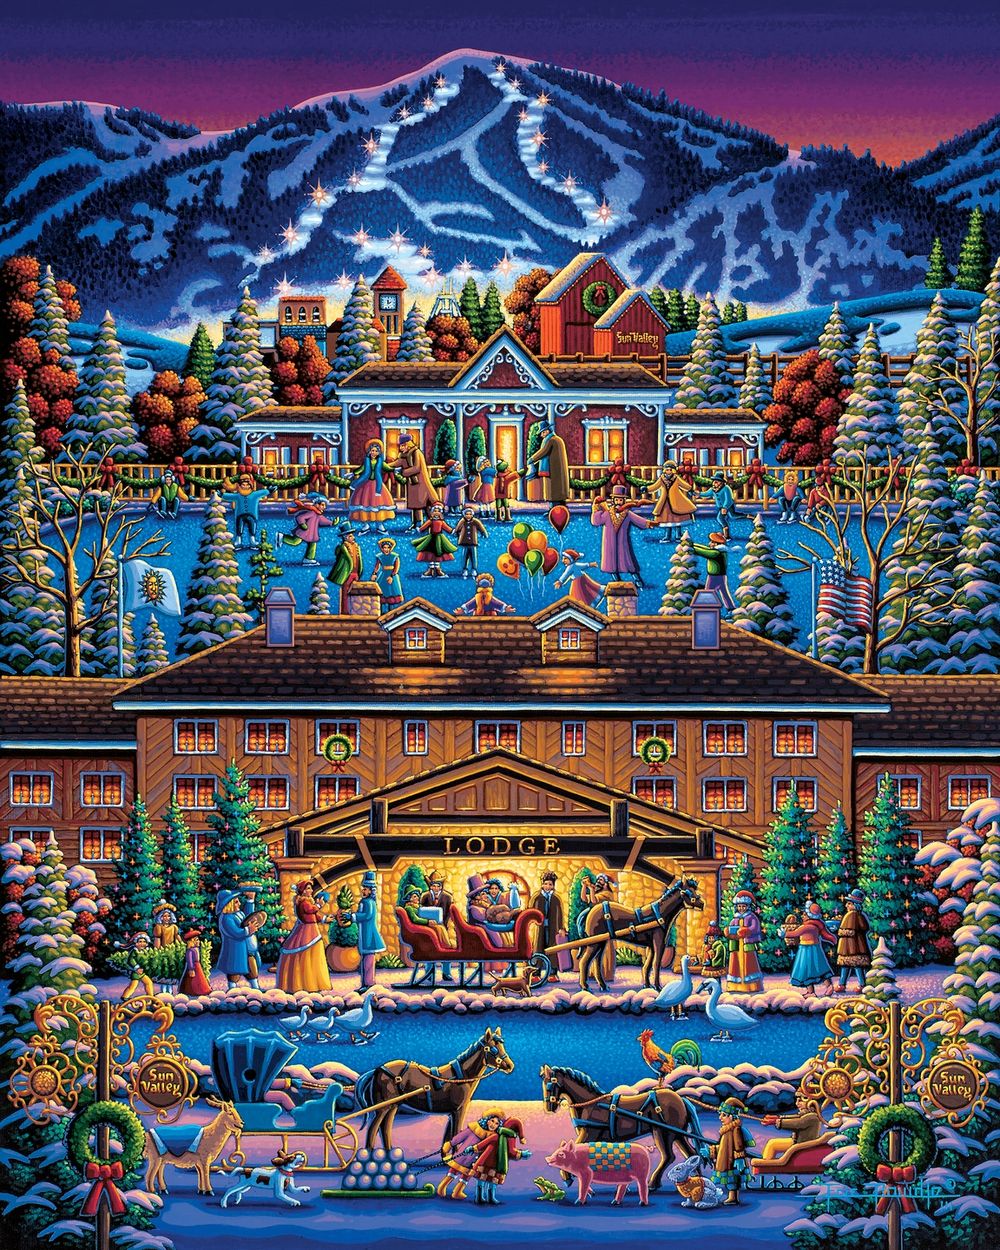 Sun Valley Holiday - Wooden Puzzle